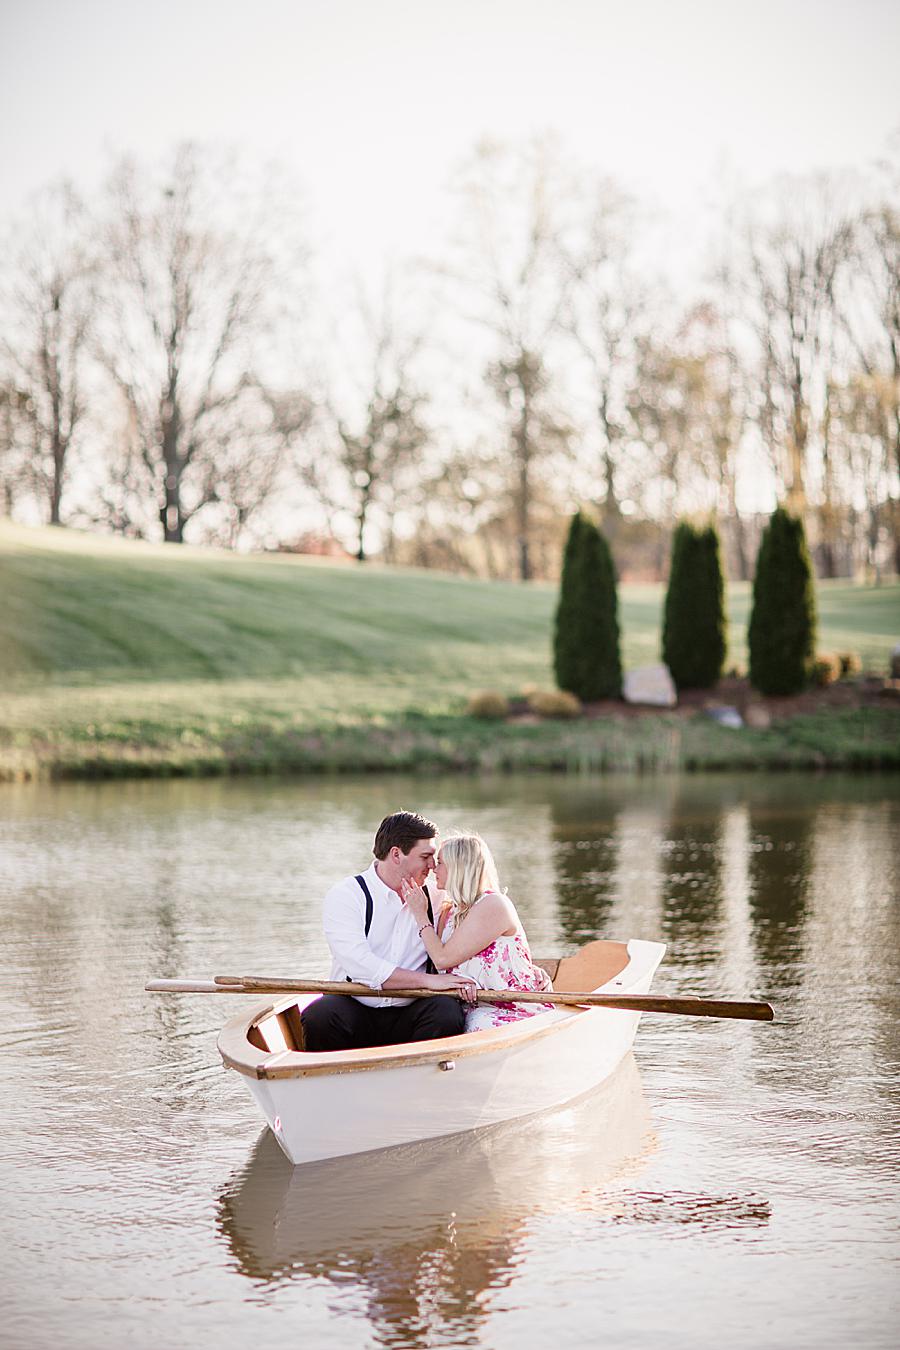 Spring pond at this 2018 favorite engagements by Knoxville Wedding Photographer, Amanda May Photos.